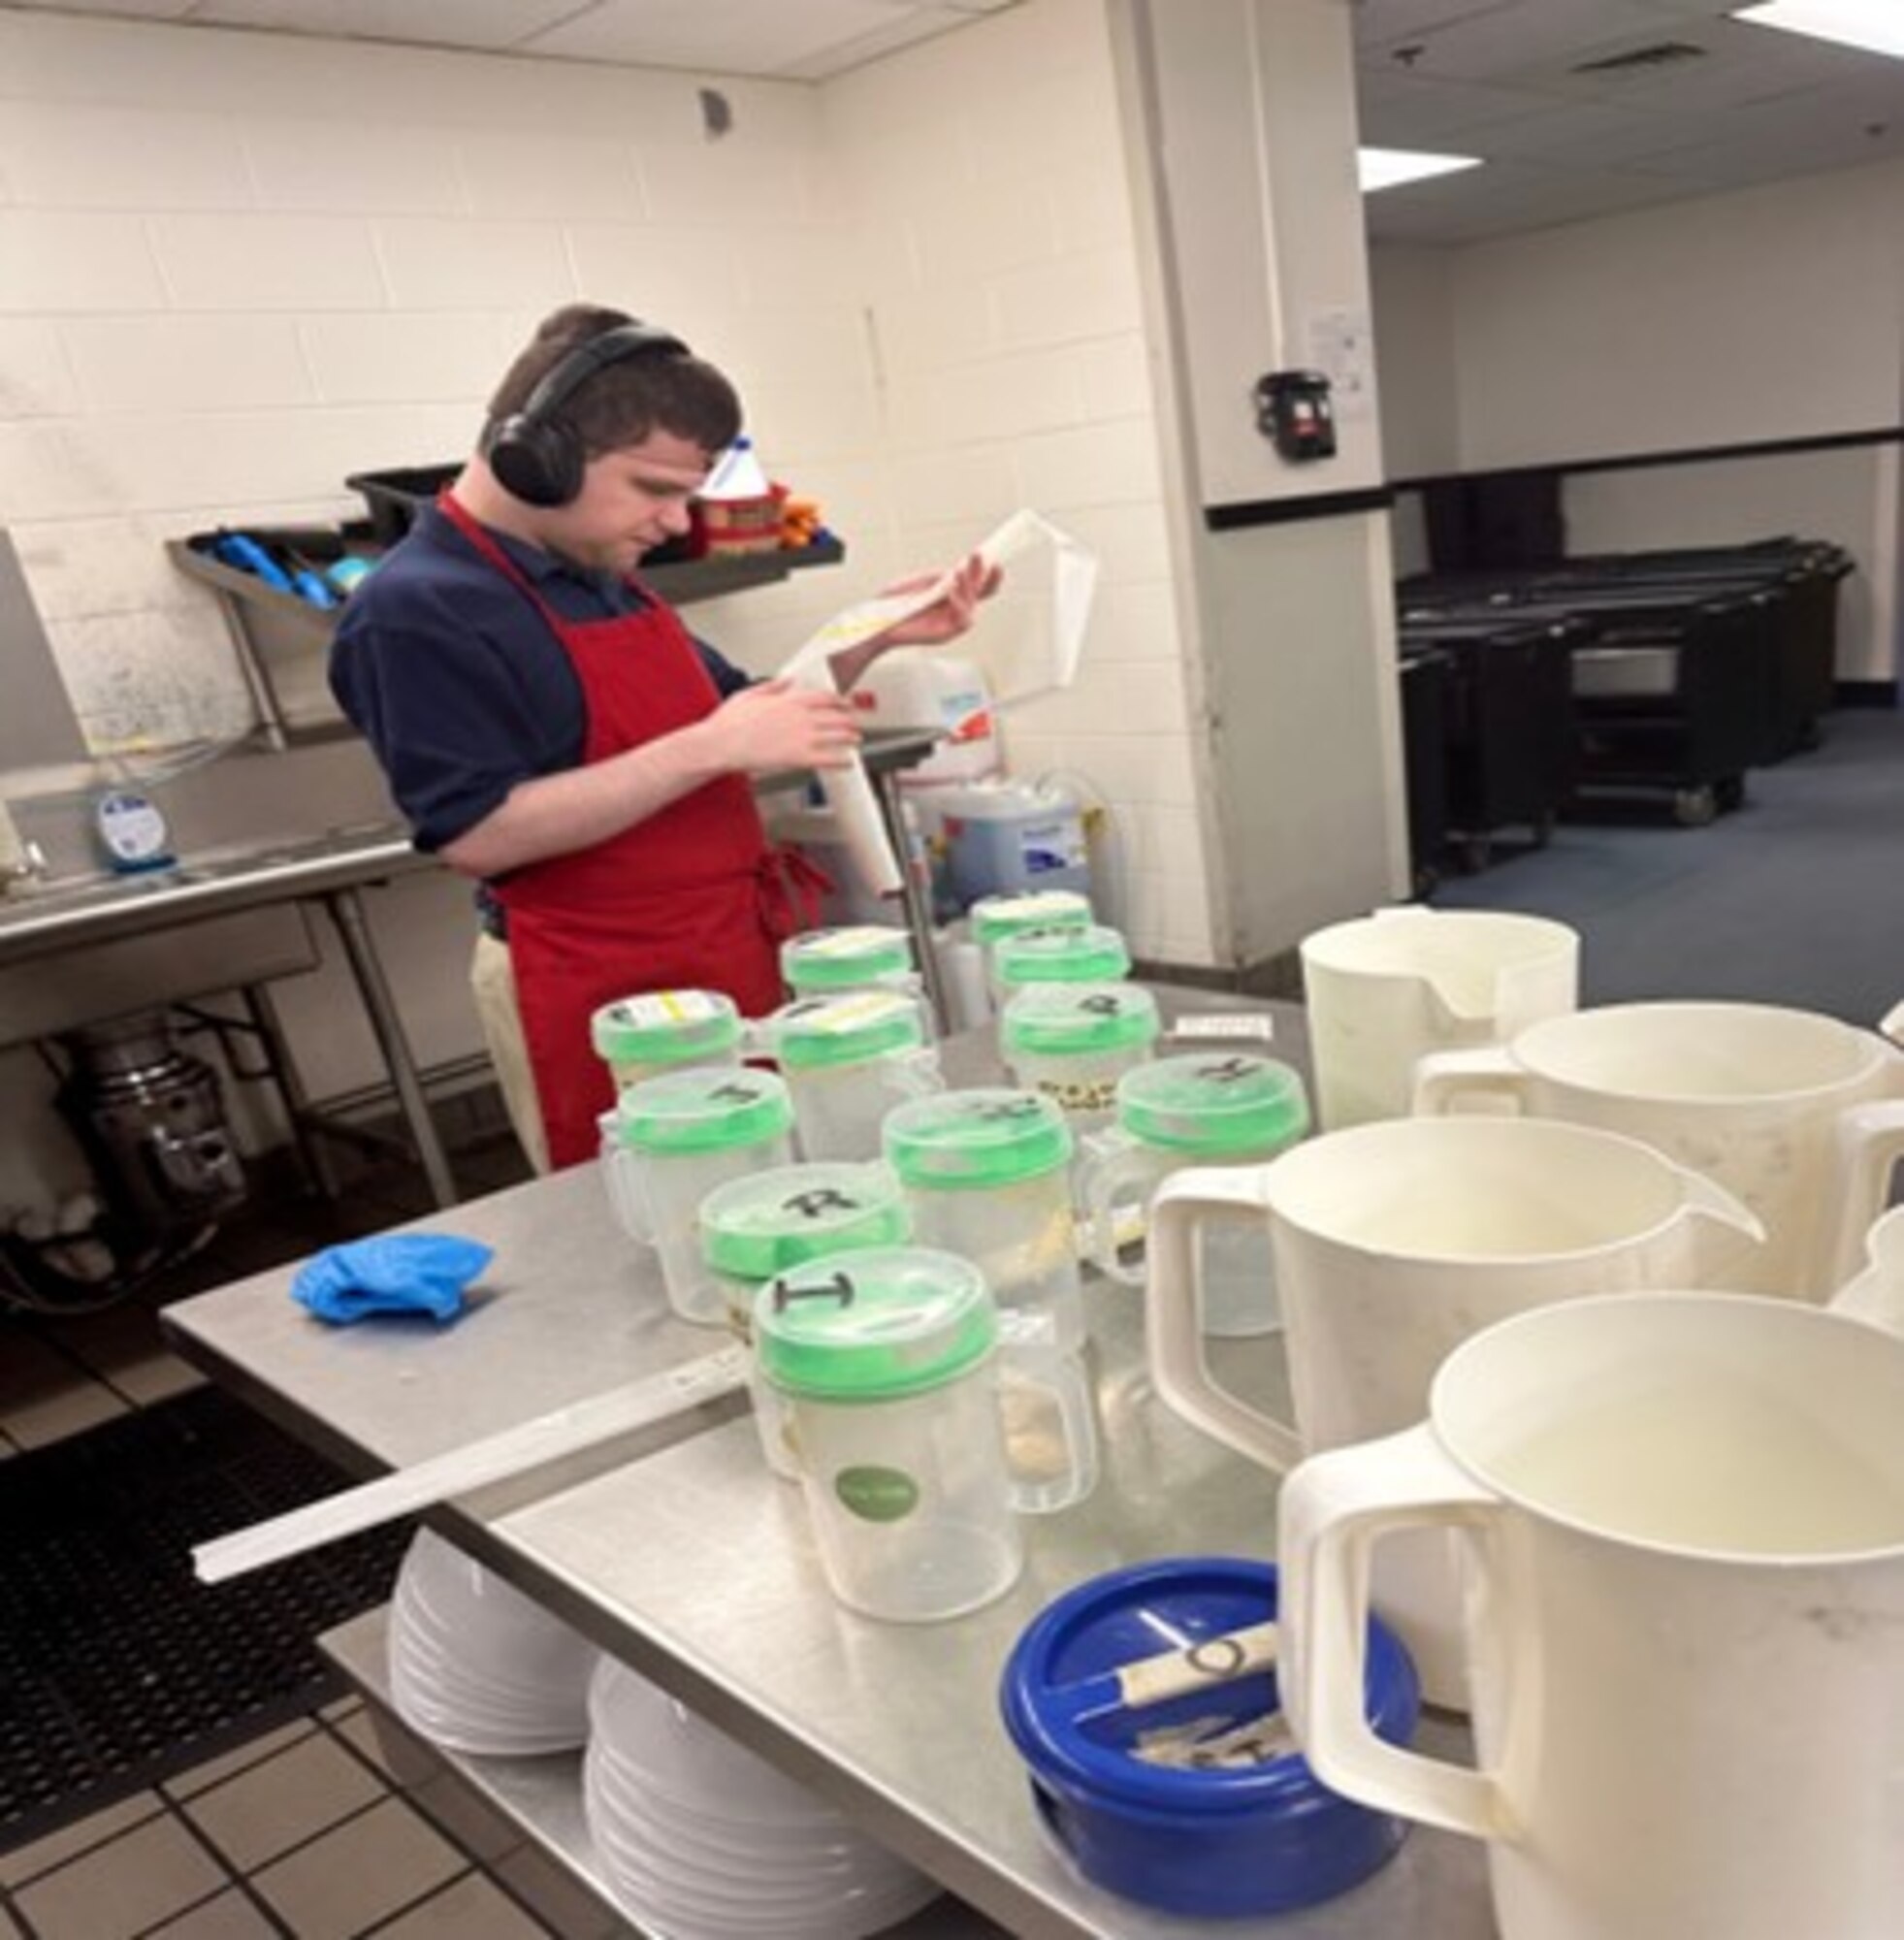 Courtesy photo of Andrew Norton, Project SEARCH intern, working in the kitchen at the Keesler Air Force Base Child Development Center.